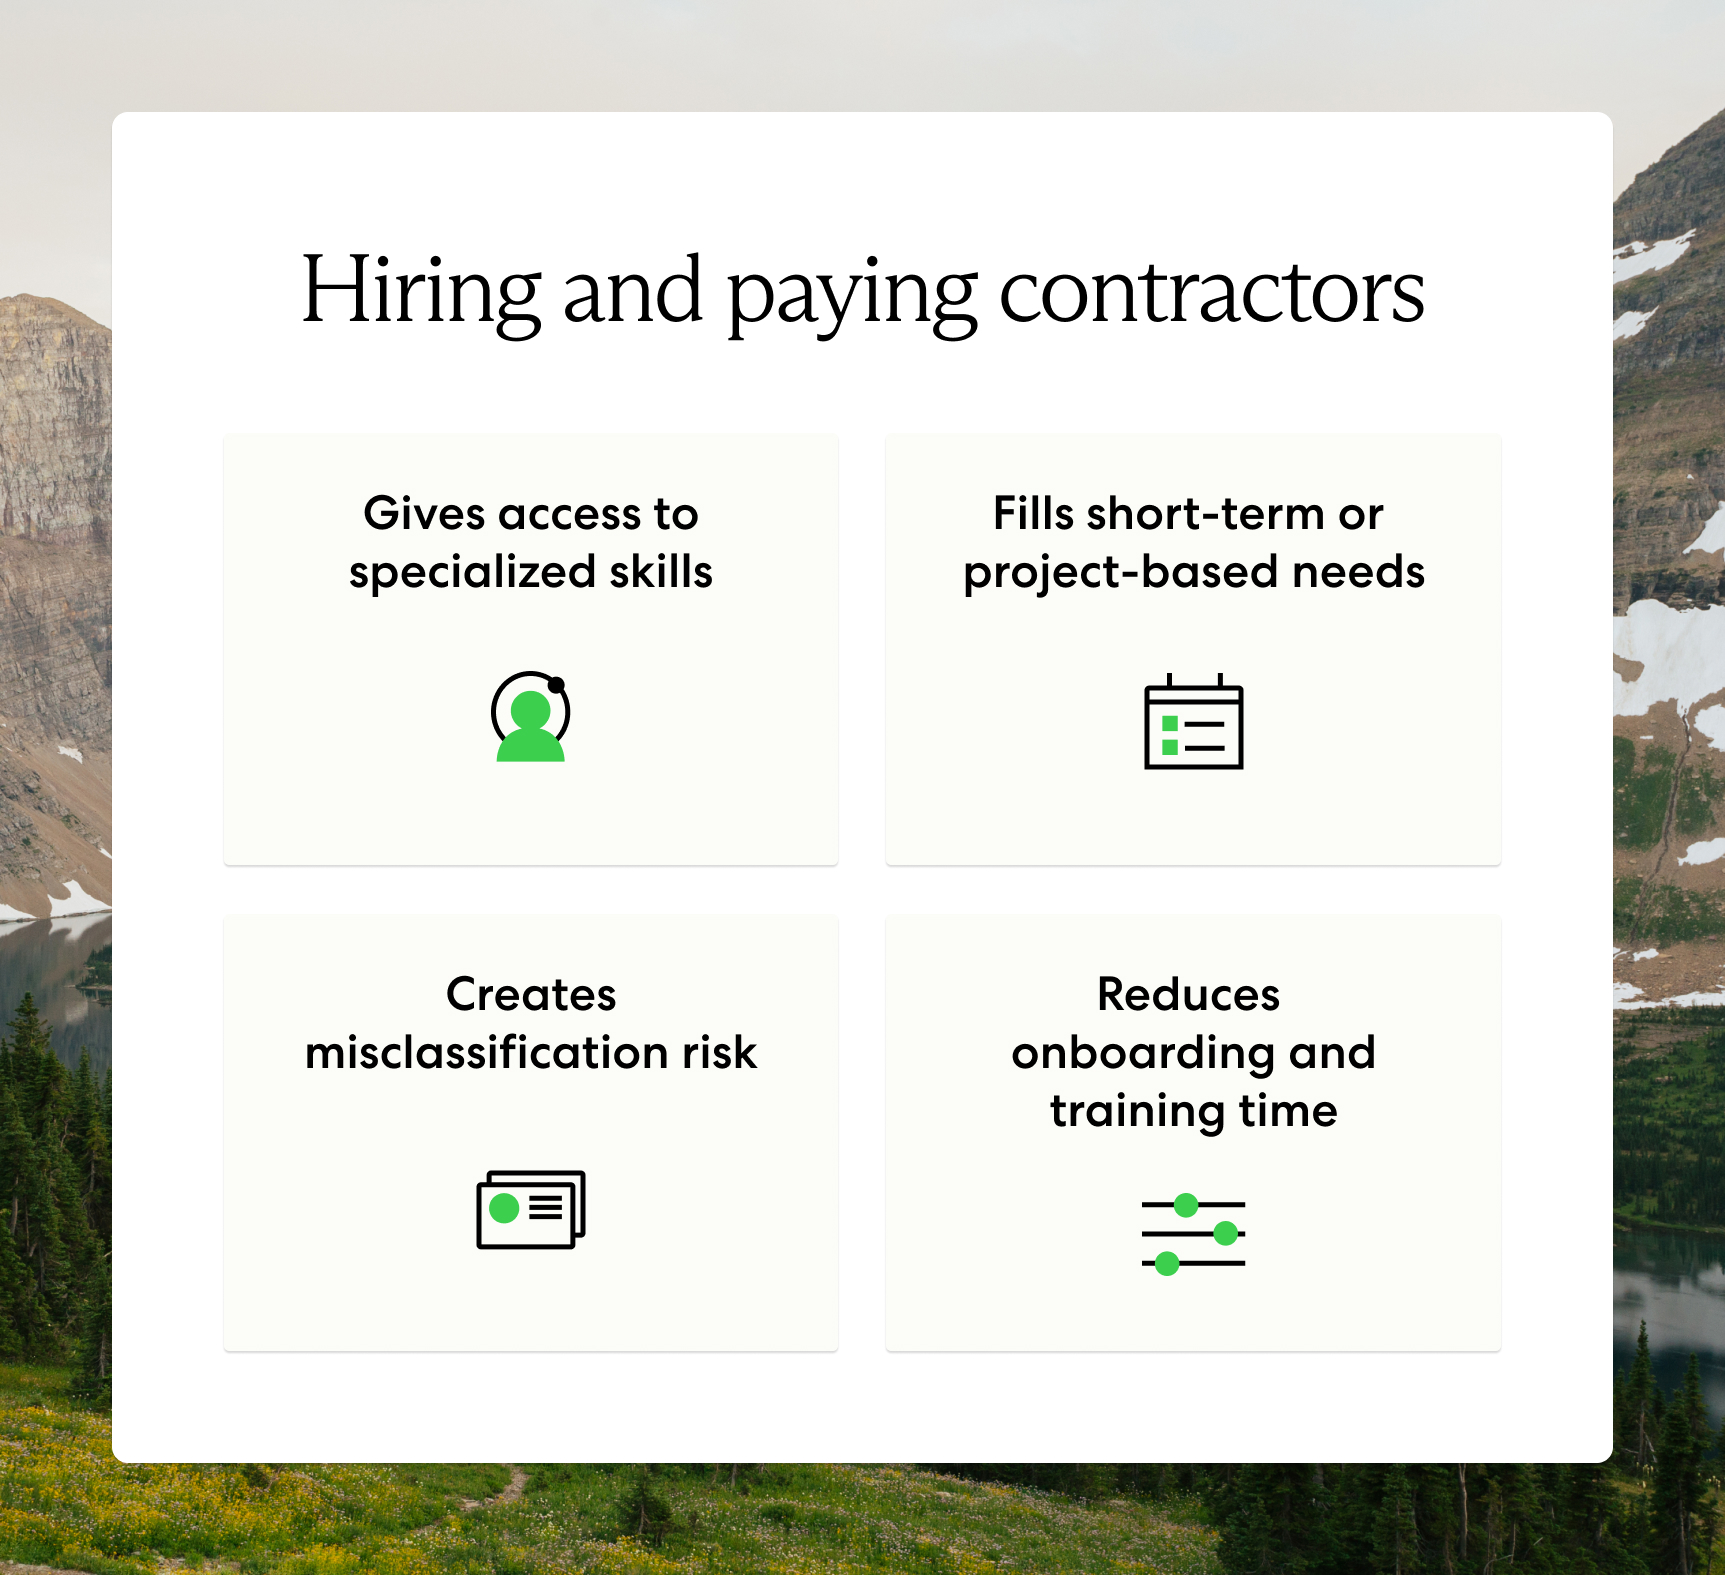 Hiring contractors gives access to specialized skills, fills short-term project-based needs, reduces onboarding time, and may cause misclassification.